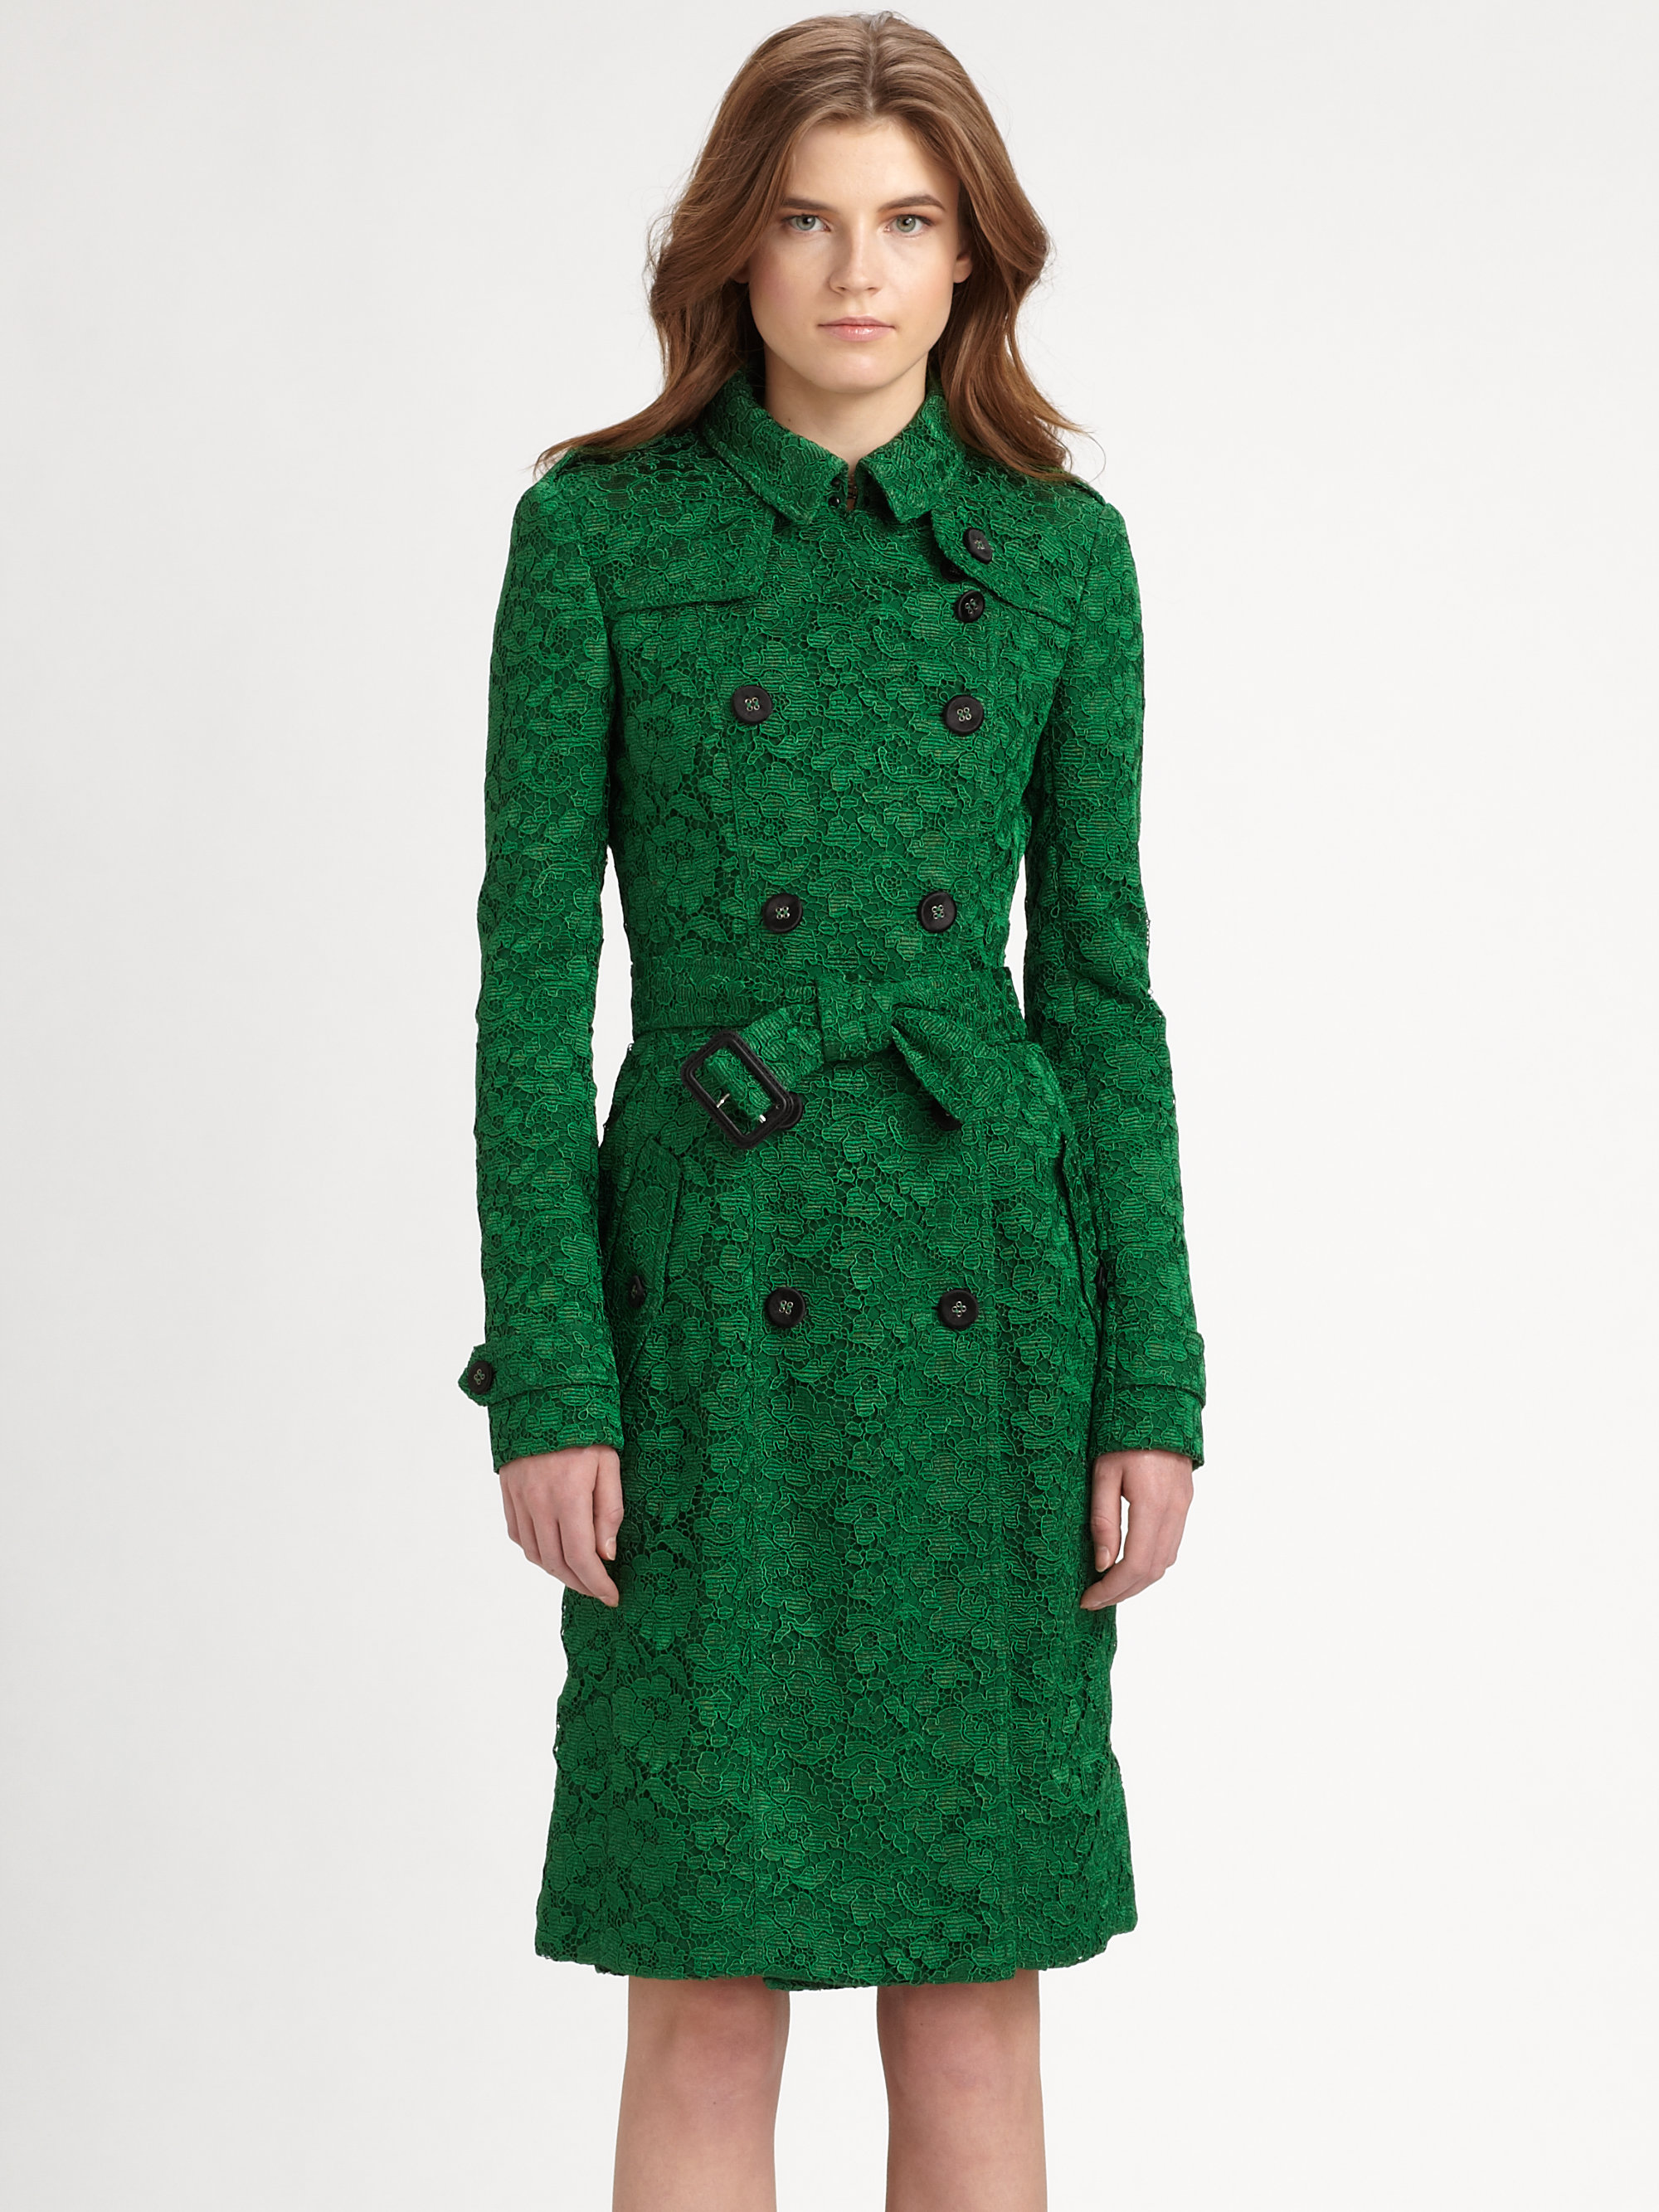 Burberry Prorsum Lace Trenchcoat in Green - Lyst